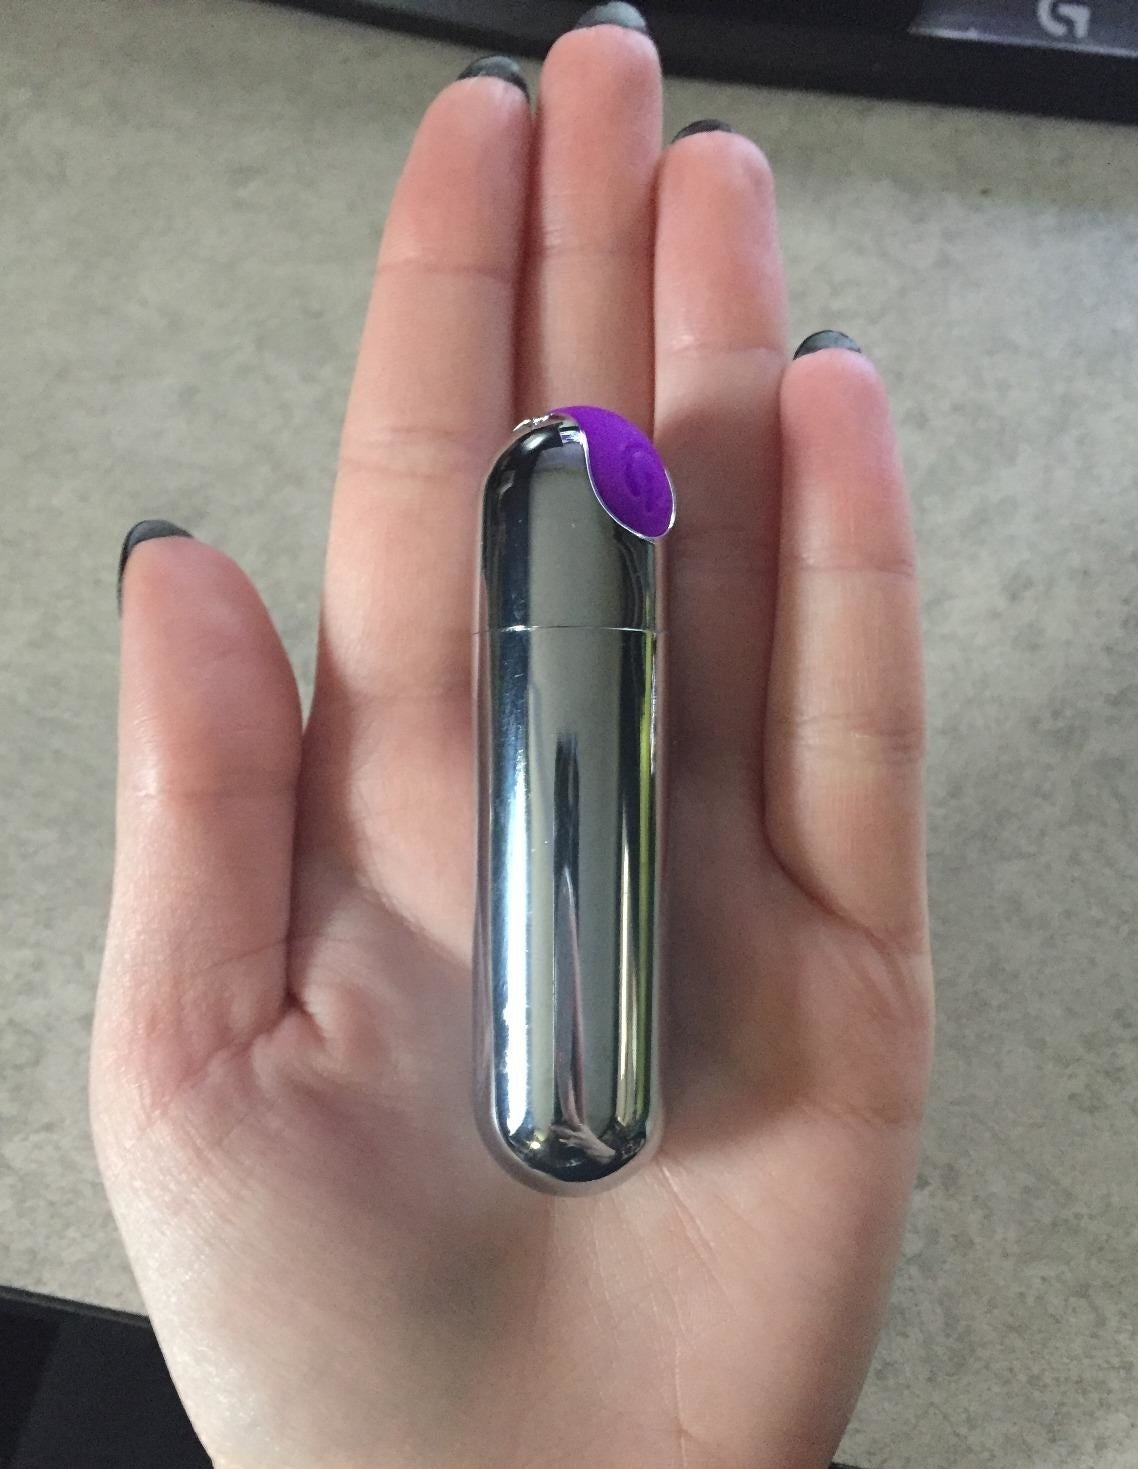 A reviewer holding the vibe. It is about the size and shape of an oval tube of lipstick.